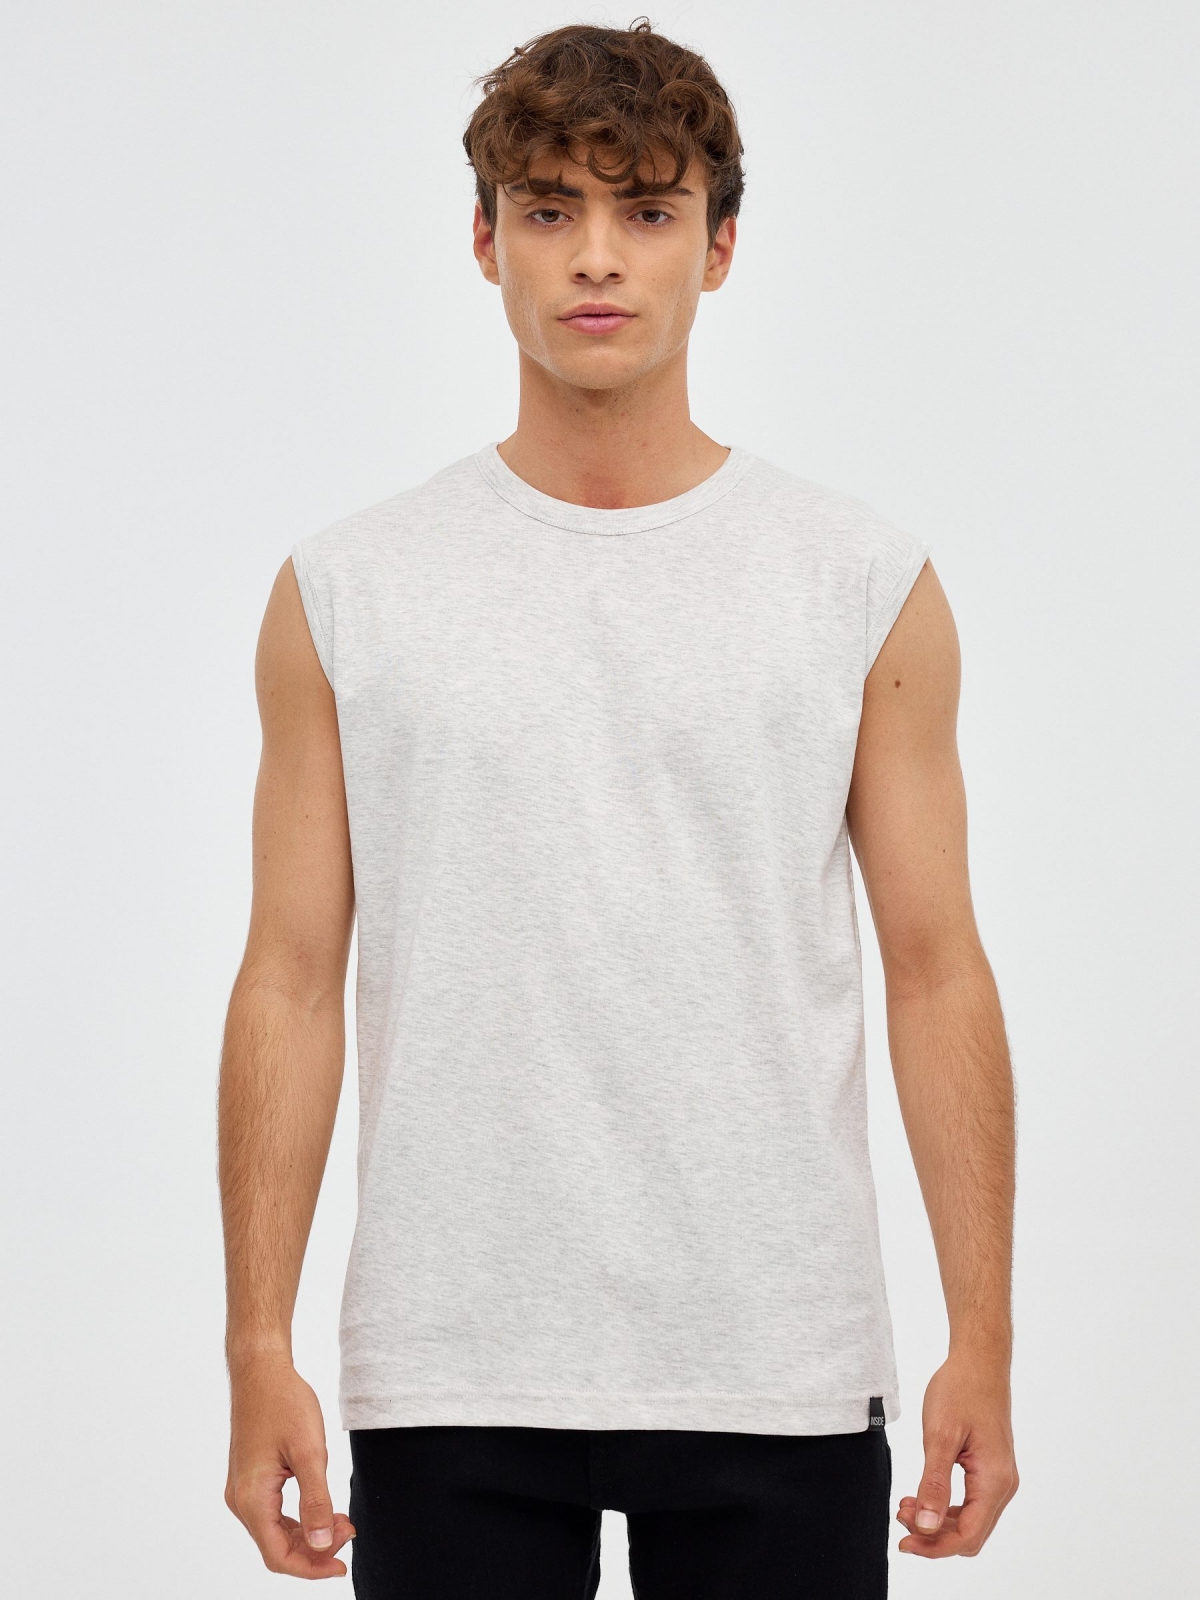 Basic sleeveless t-shirt grey middle front view